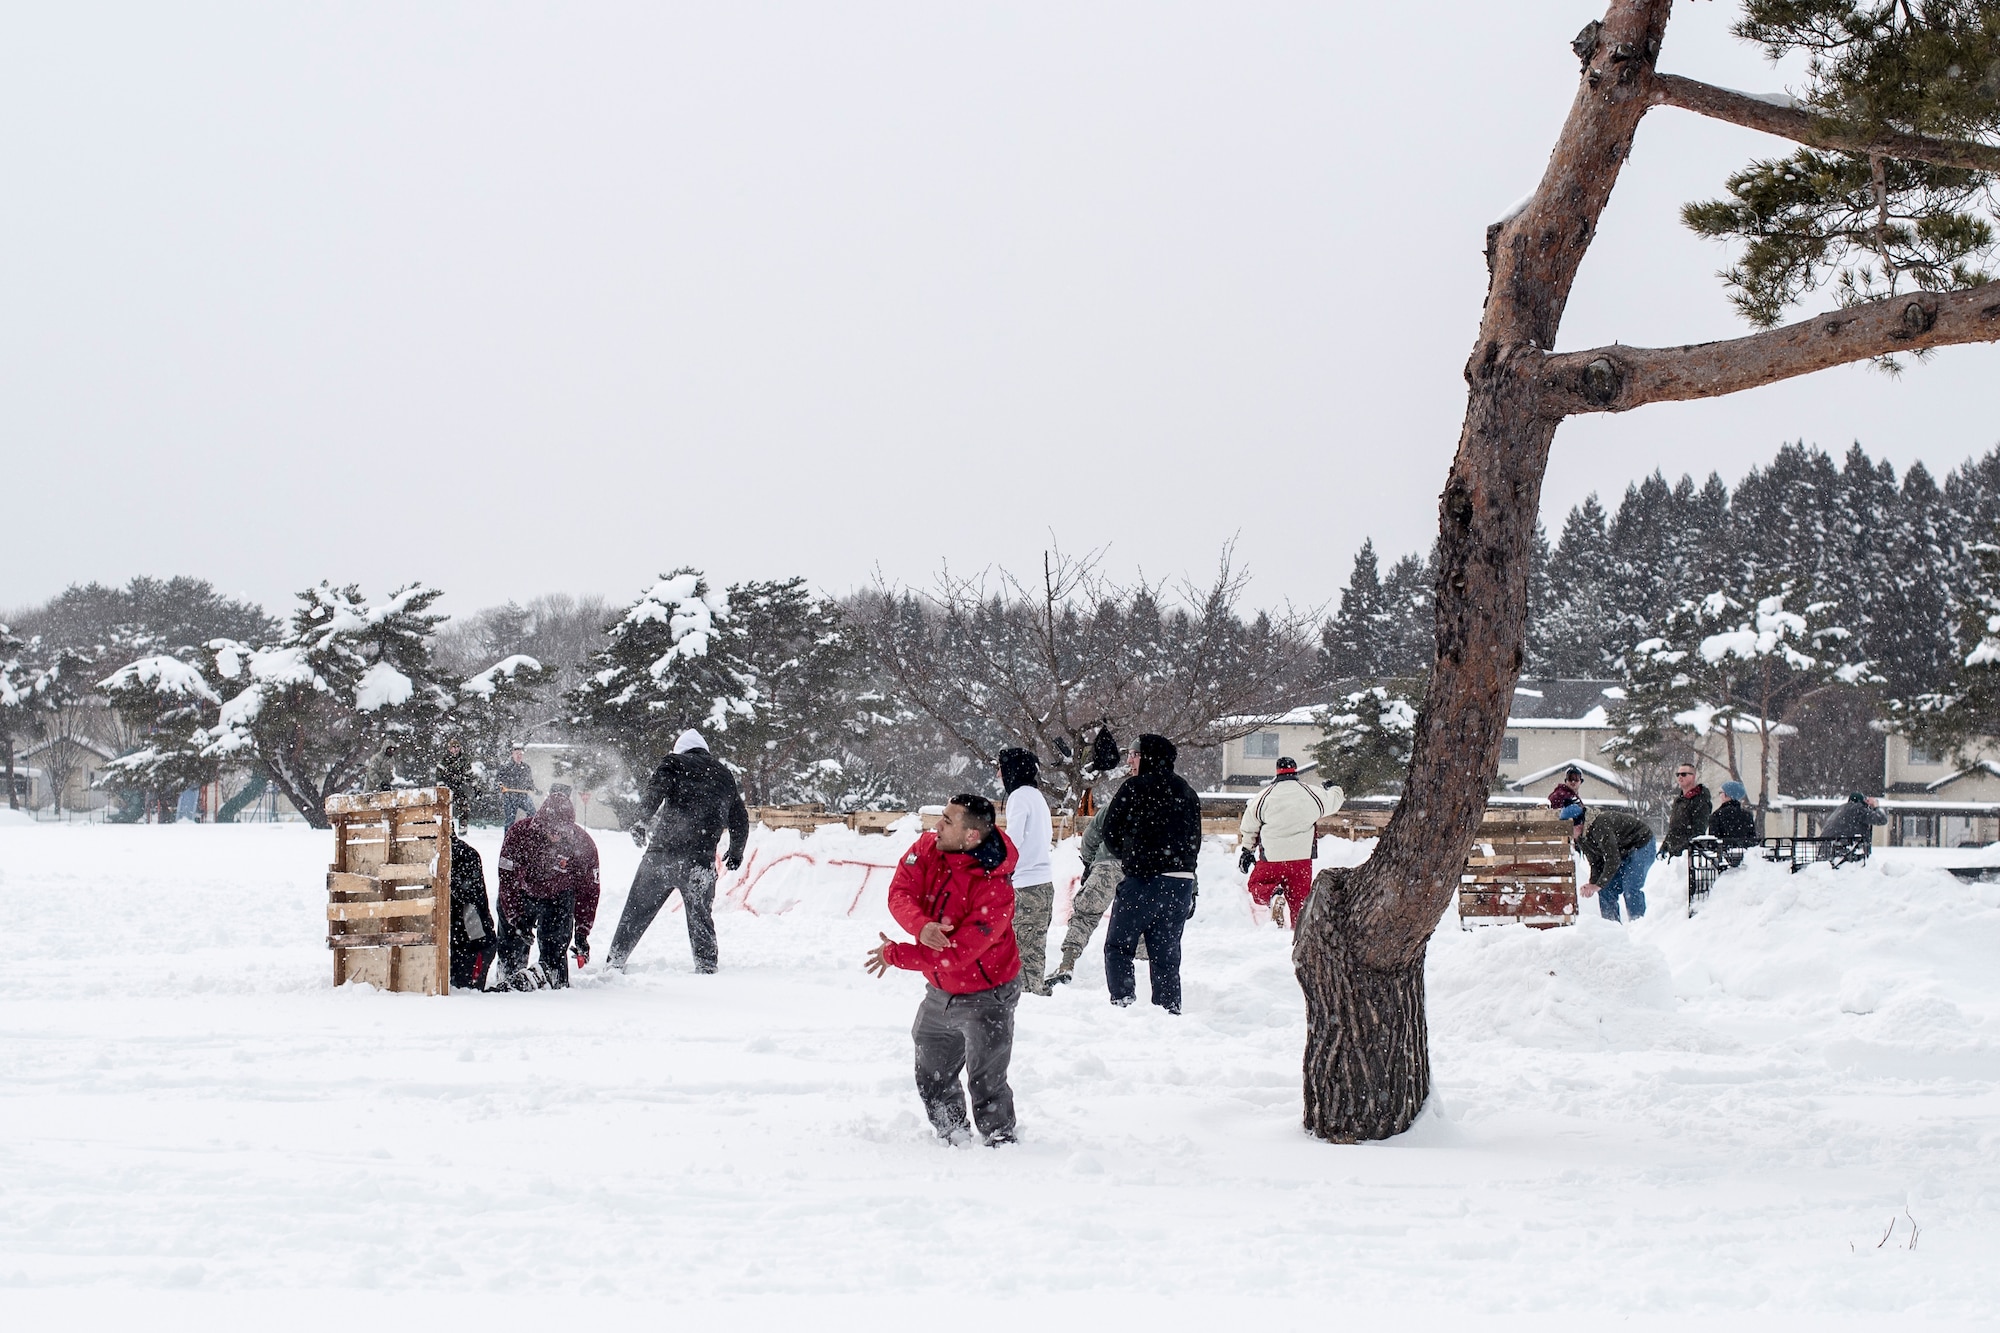 U.S. Air Force 35th Civil Engineer Squadron Airmen gather for the inaugural “Snowblast” event at Misawa Air Base, Japan, Feb. 14, 2019. Members with the Japan Air Self-Defense Force participated in the event creating their own fortress, preparing to win the snowball and capture the flag challenges. (U.S. Air Force photo by 1st Lt. Jeremy Garcia)